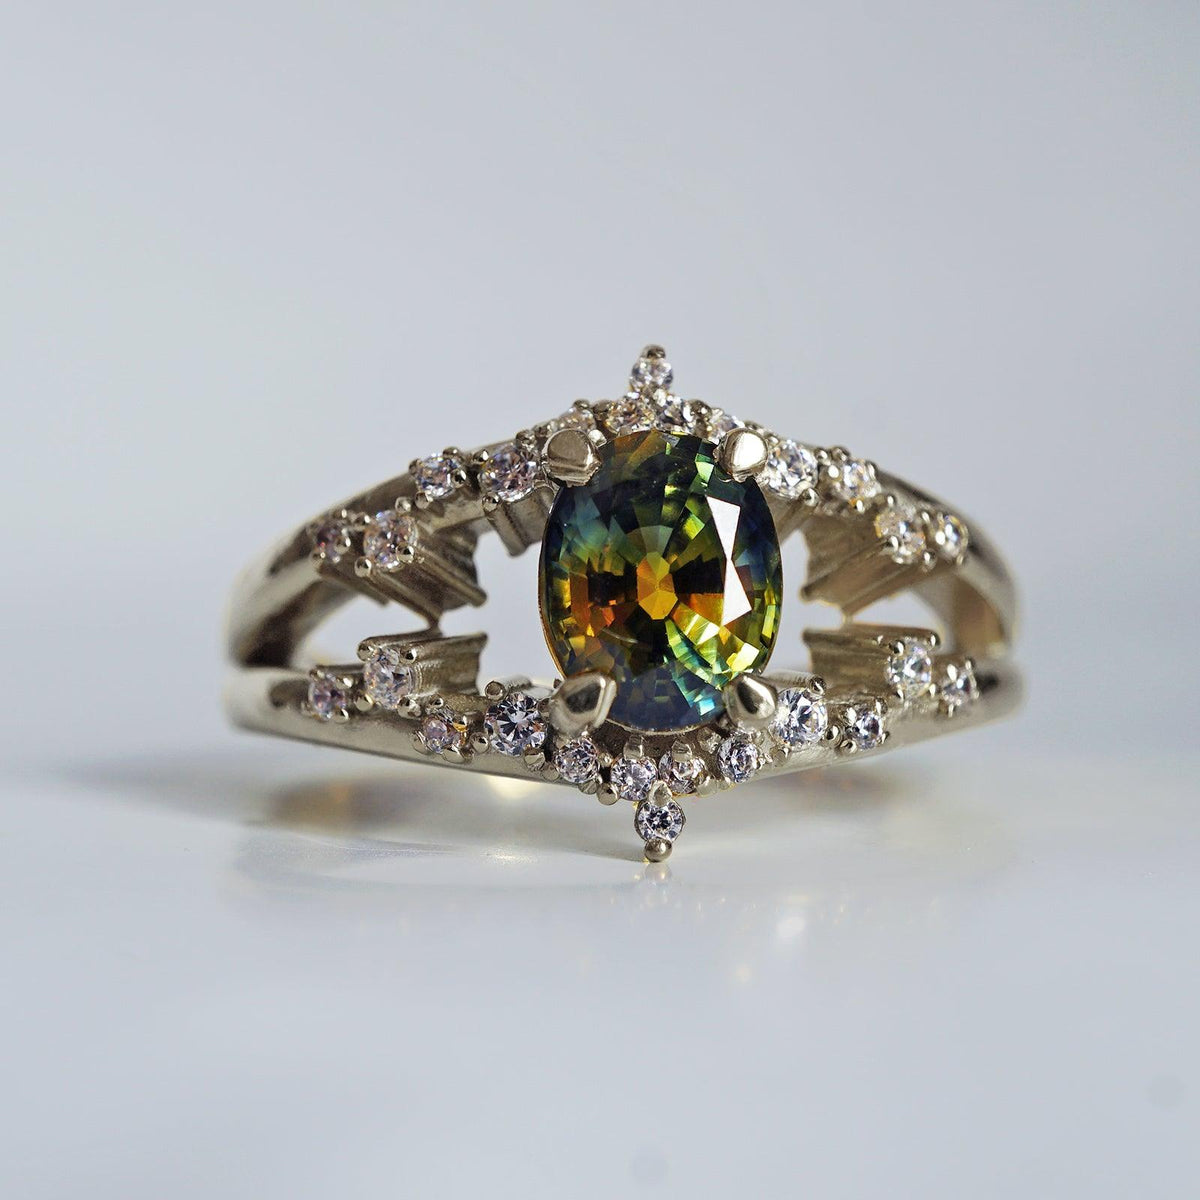 One Of A Kind: Celestial Parti Sapphire Diamond Ring